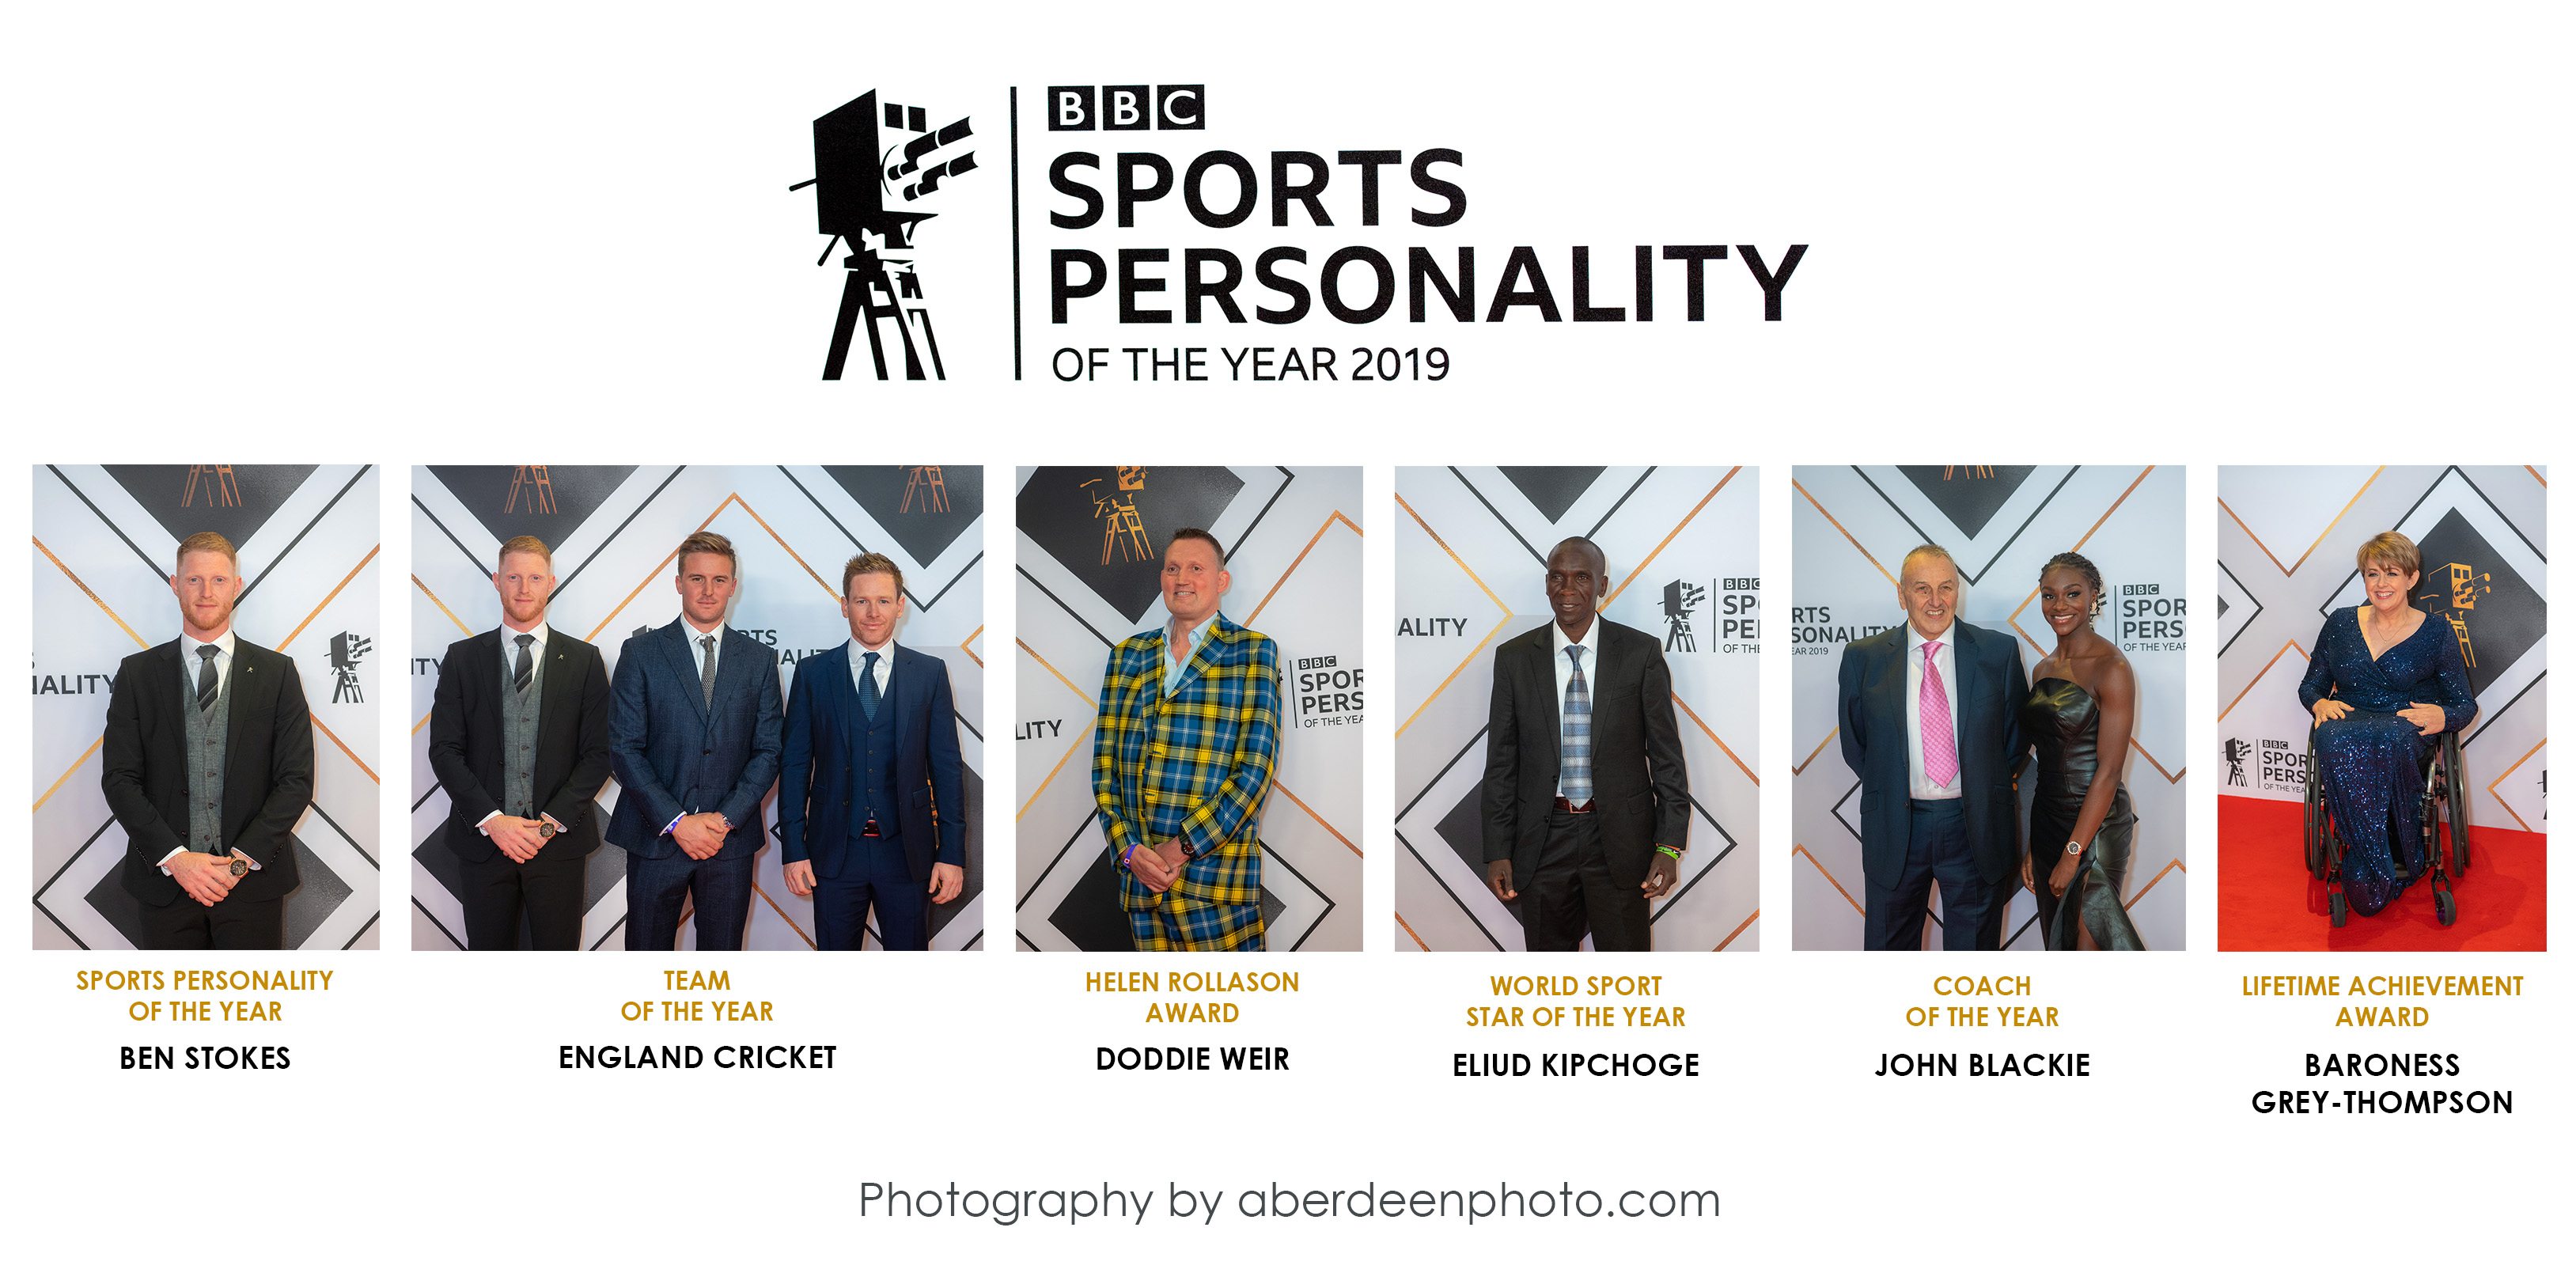 2019, December 15th – BBC Sports Personality of The Year 2019